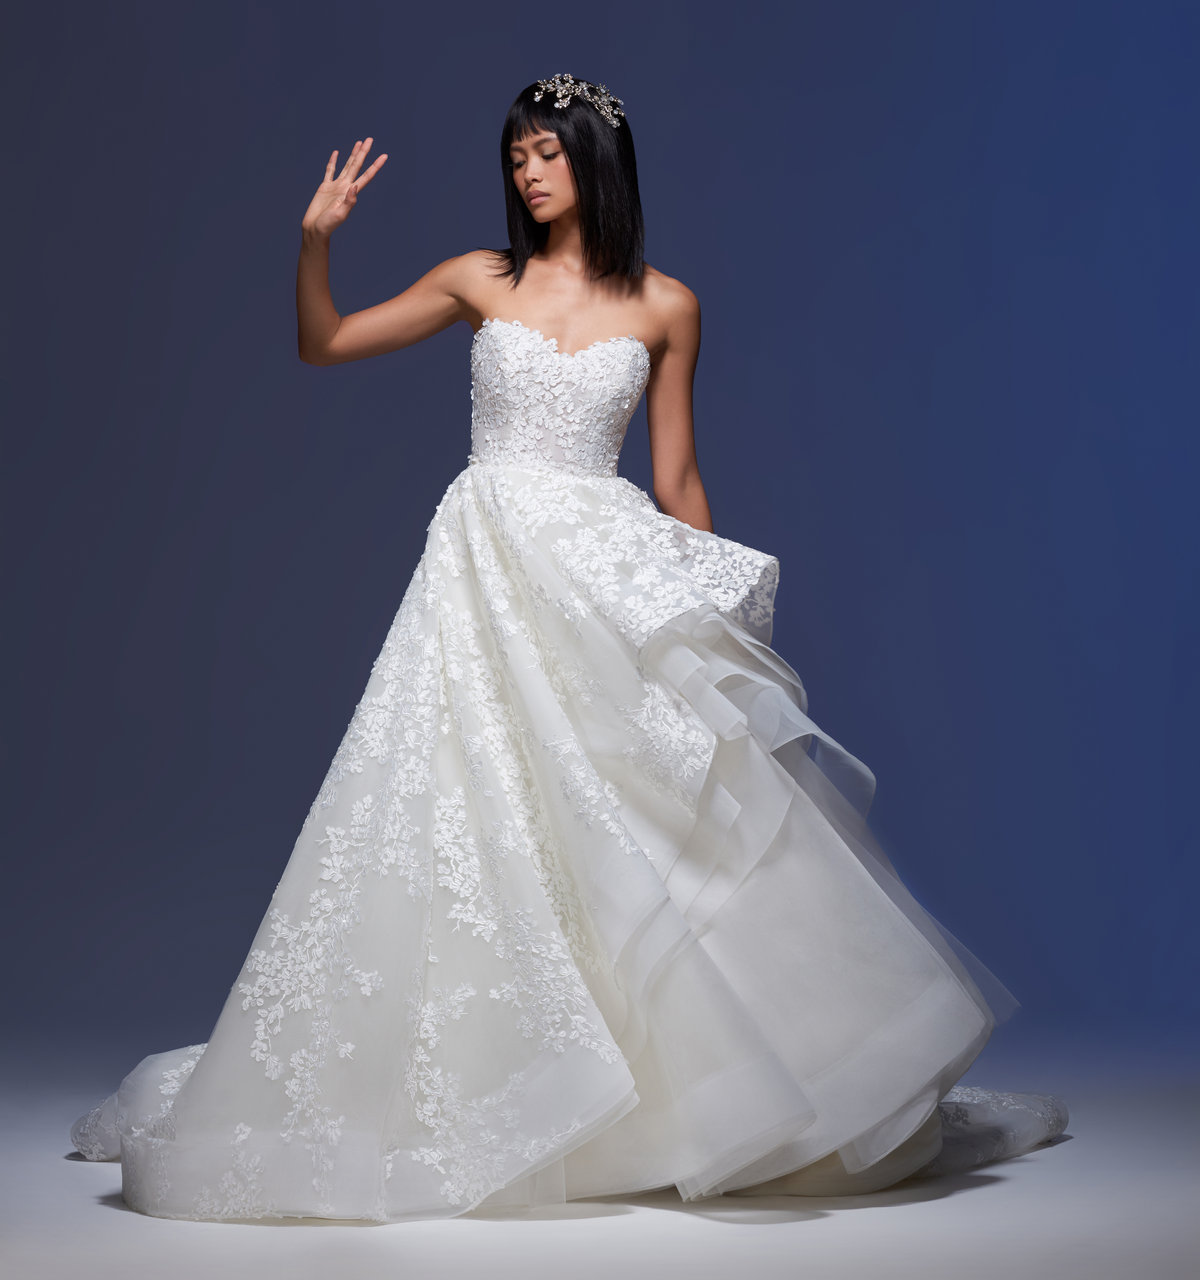 Top Strapless Sweetheart Neckline Wedding Dress of all time The ultimate guide 